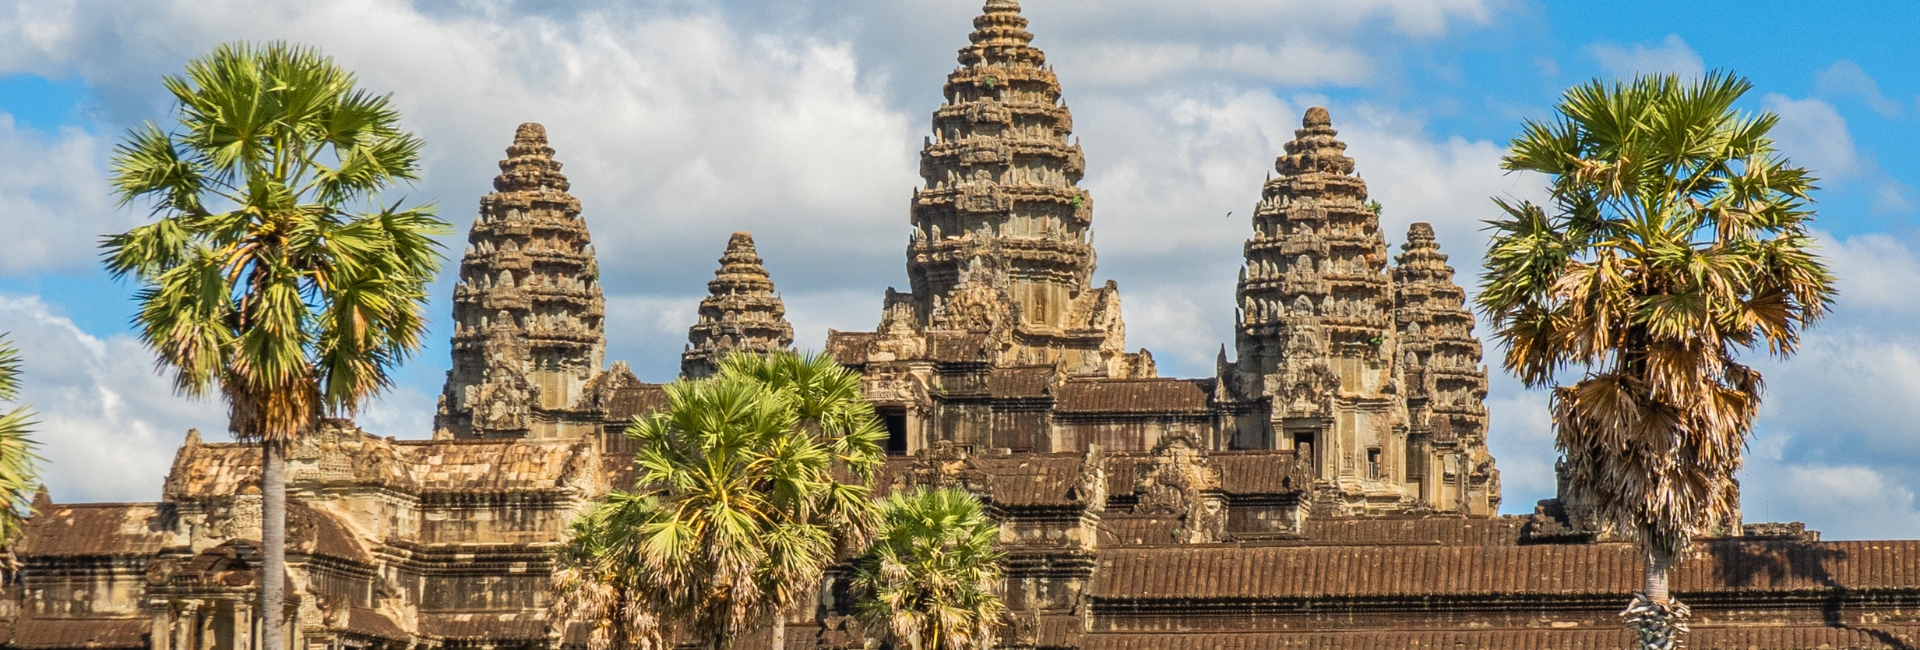 Best Cambodia Travel Guide Book 2024: Must read for an Unforgettable Journey